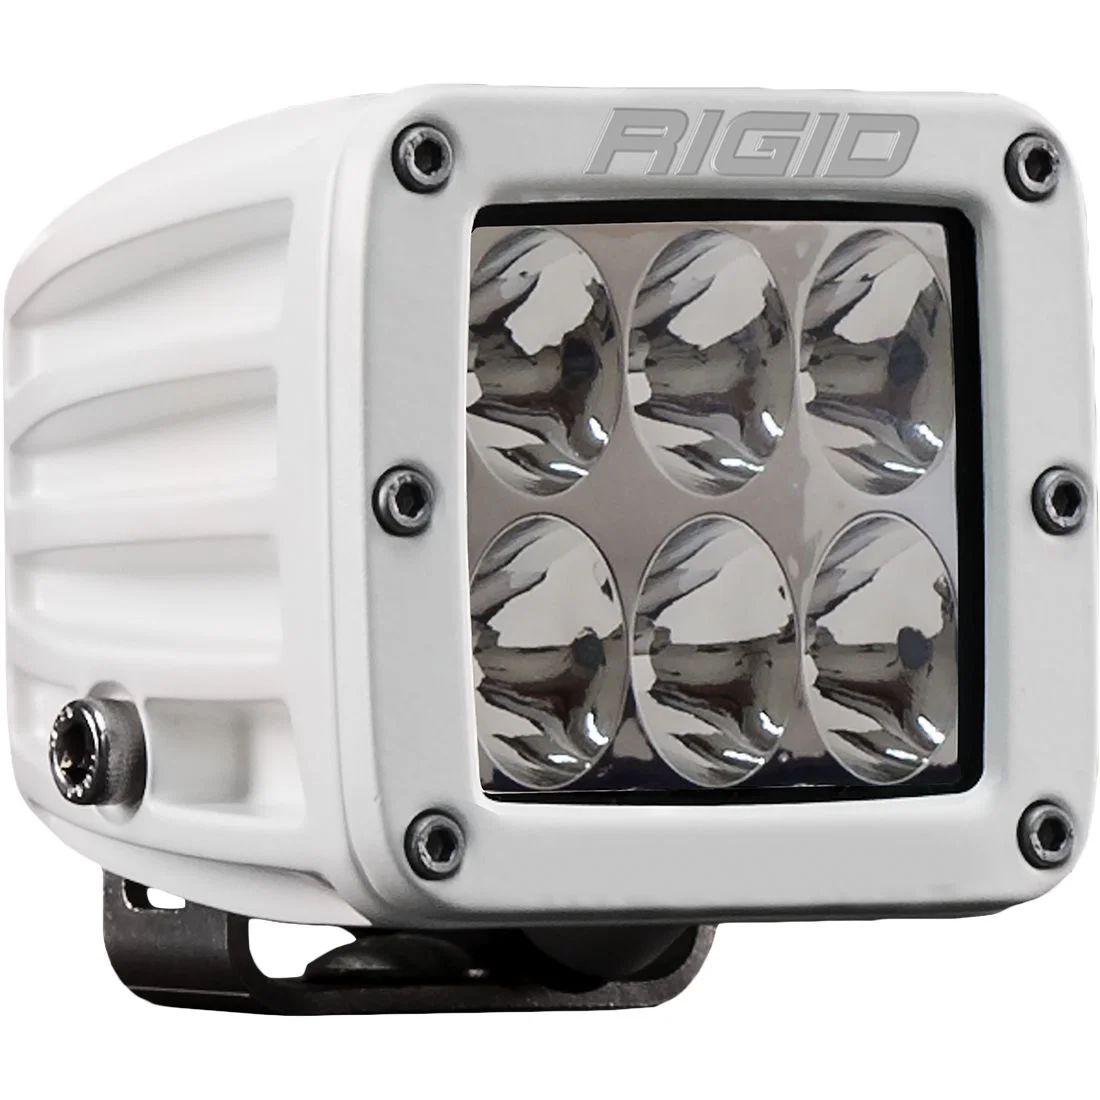 SINGLE Rigid D-Series PRO WHITE CASE OFFROAD Surface Mount Light Pods (SOLD IN SINGLES)